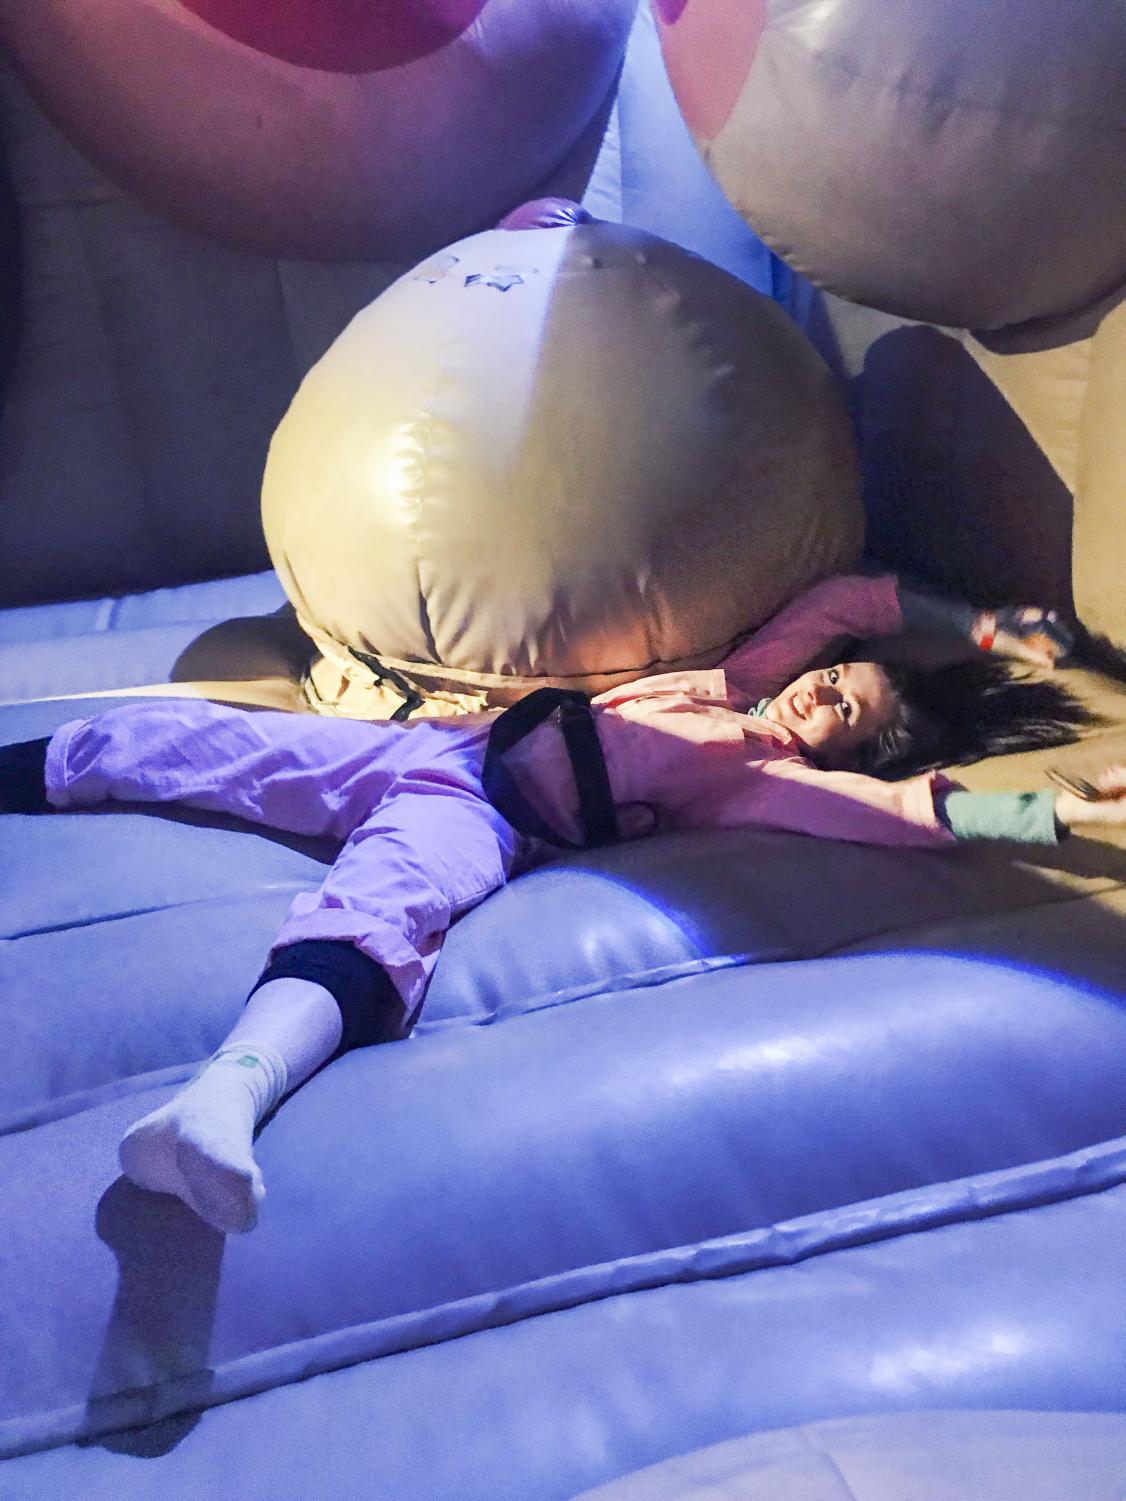 Museum of Sex Bouncy House Titillates Visitors - The Observer